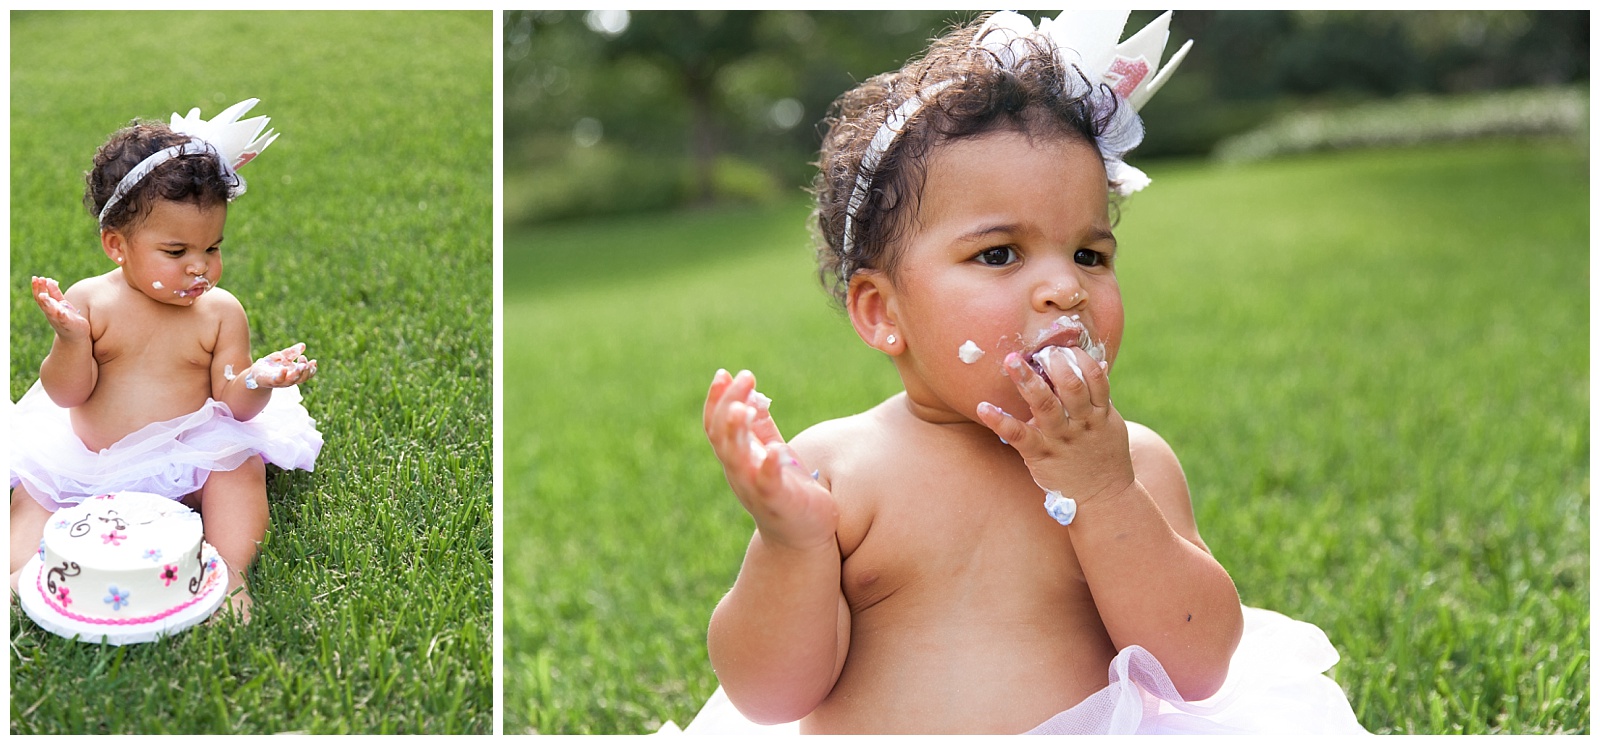 Cake smash photoshoot on her first birthday in Dallas Texas by Alyssa Grace Photography